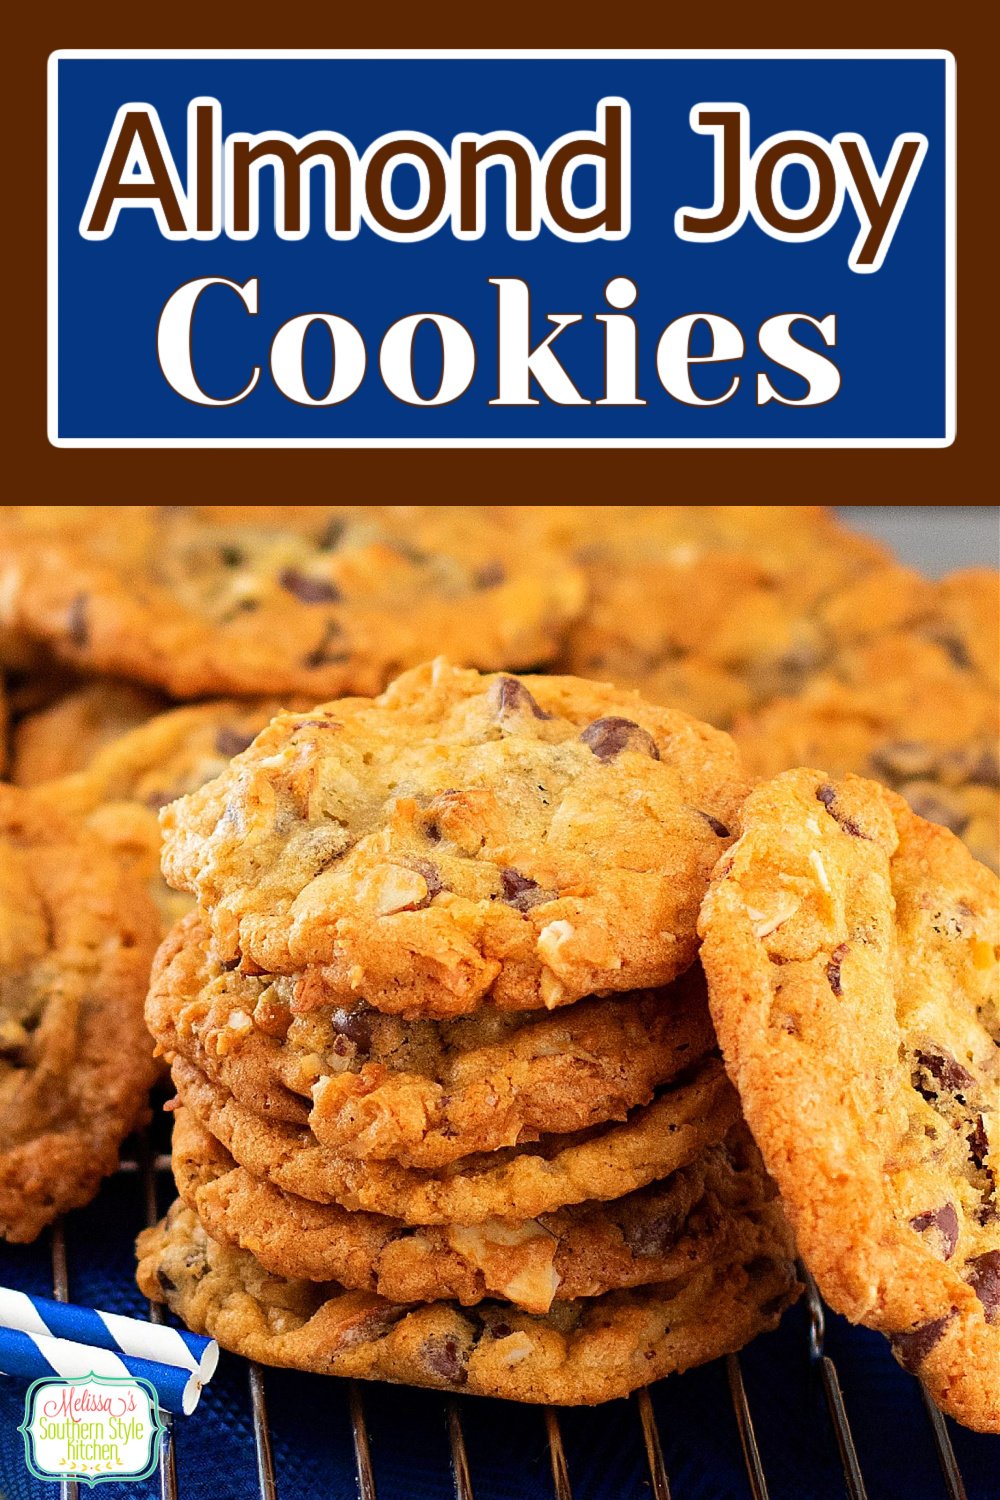 The flavors in these buttery made from scratch cookies were inspired by Almond Joy candy bars #almondjoycookies #cookies #cookierecipes #holidaybaking #christmascookies #southernrecipes #chocolatechipcookies #bestcookierecipes via @melissasssk